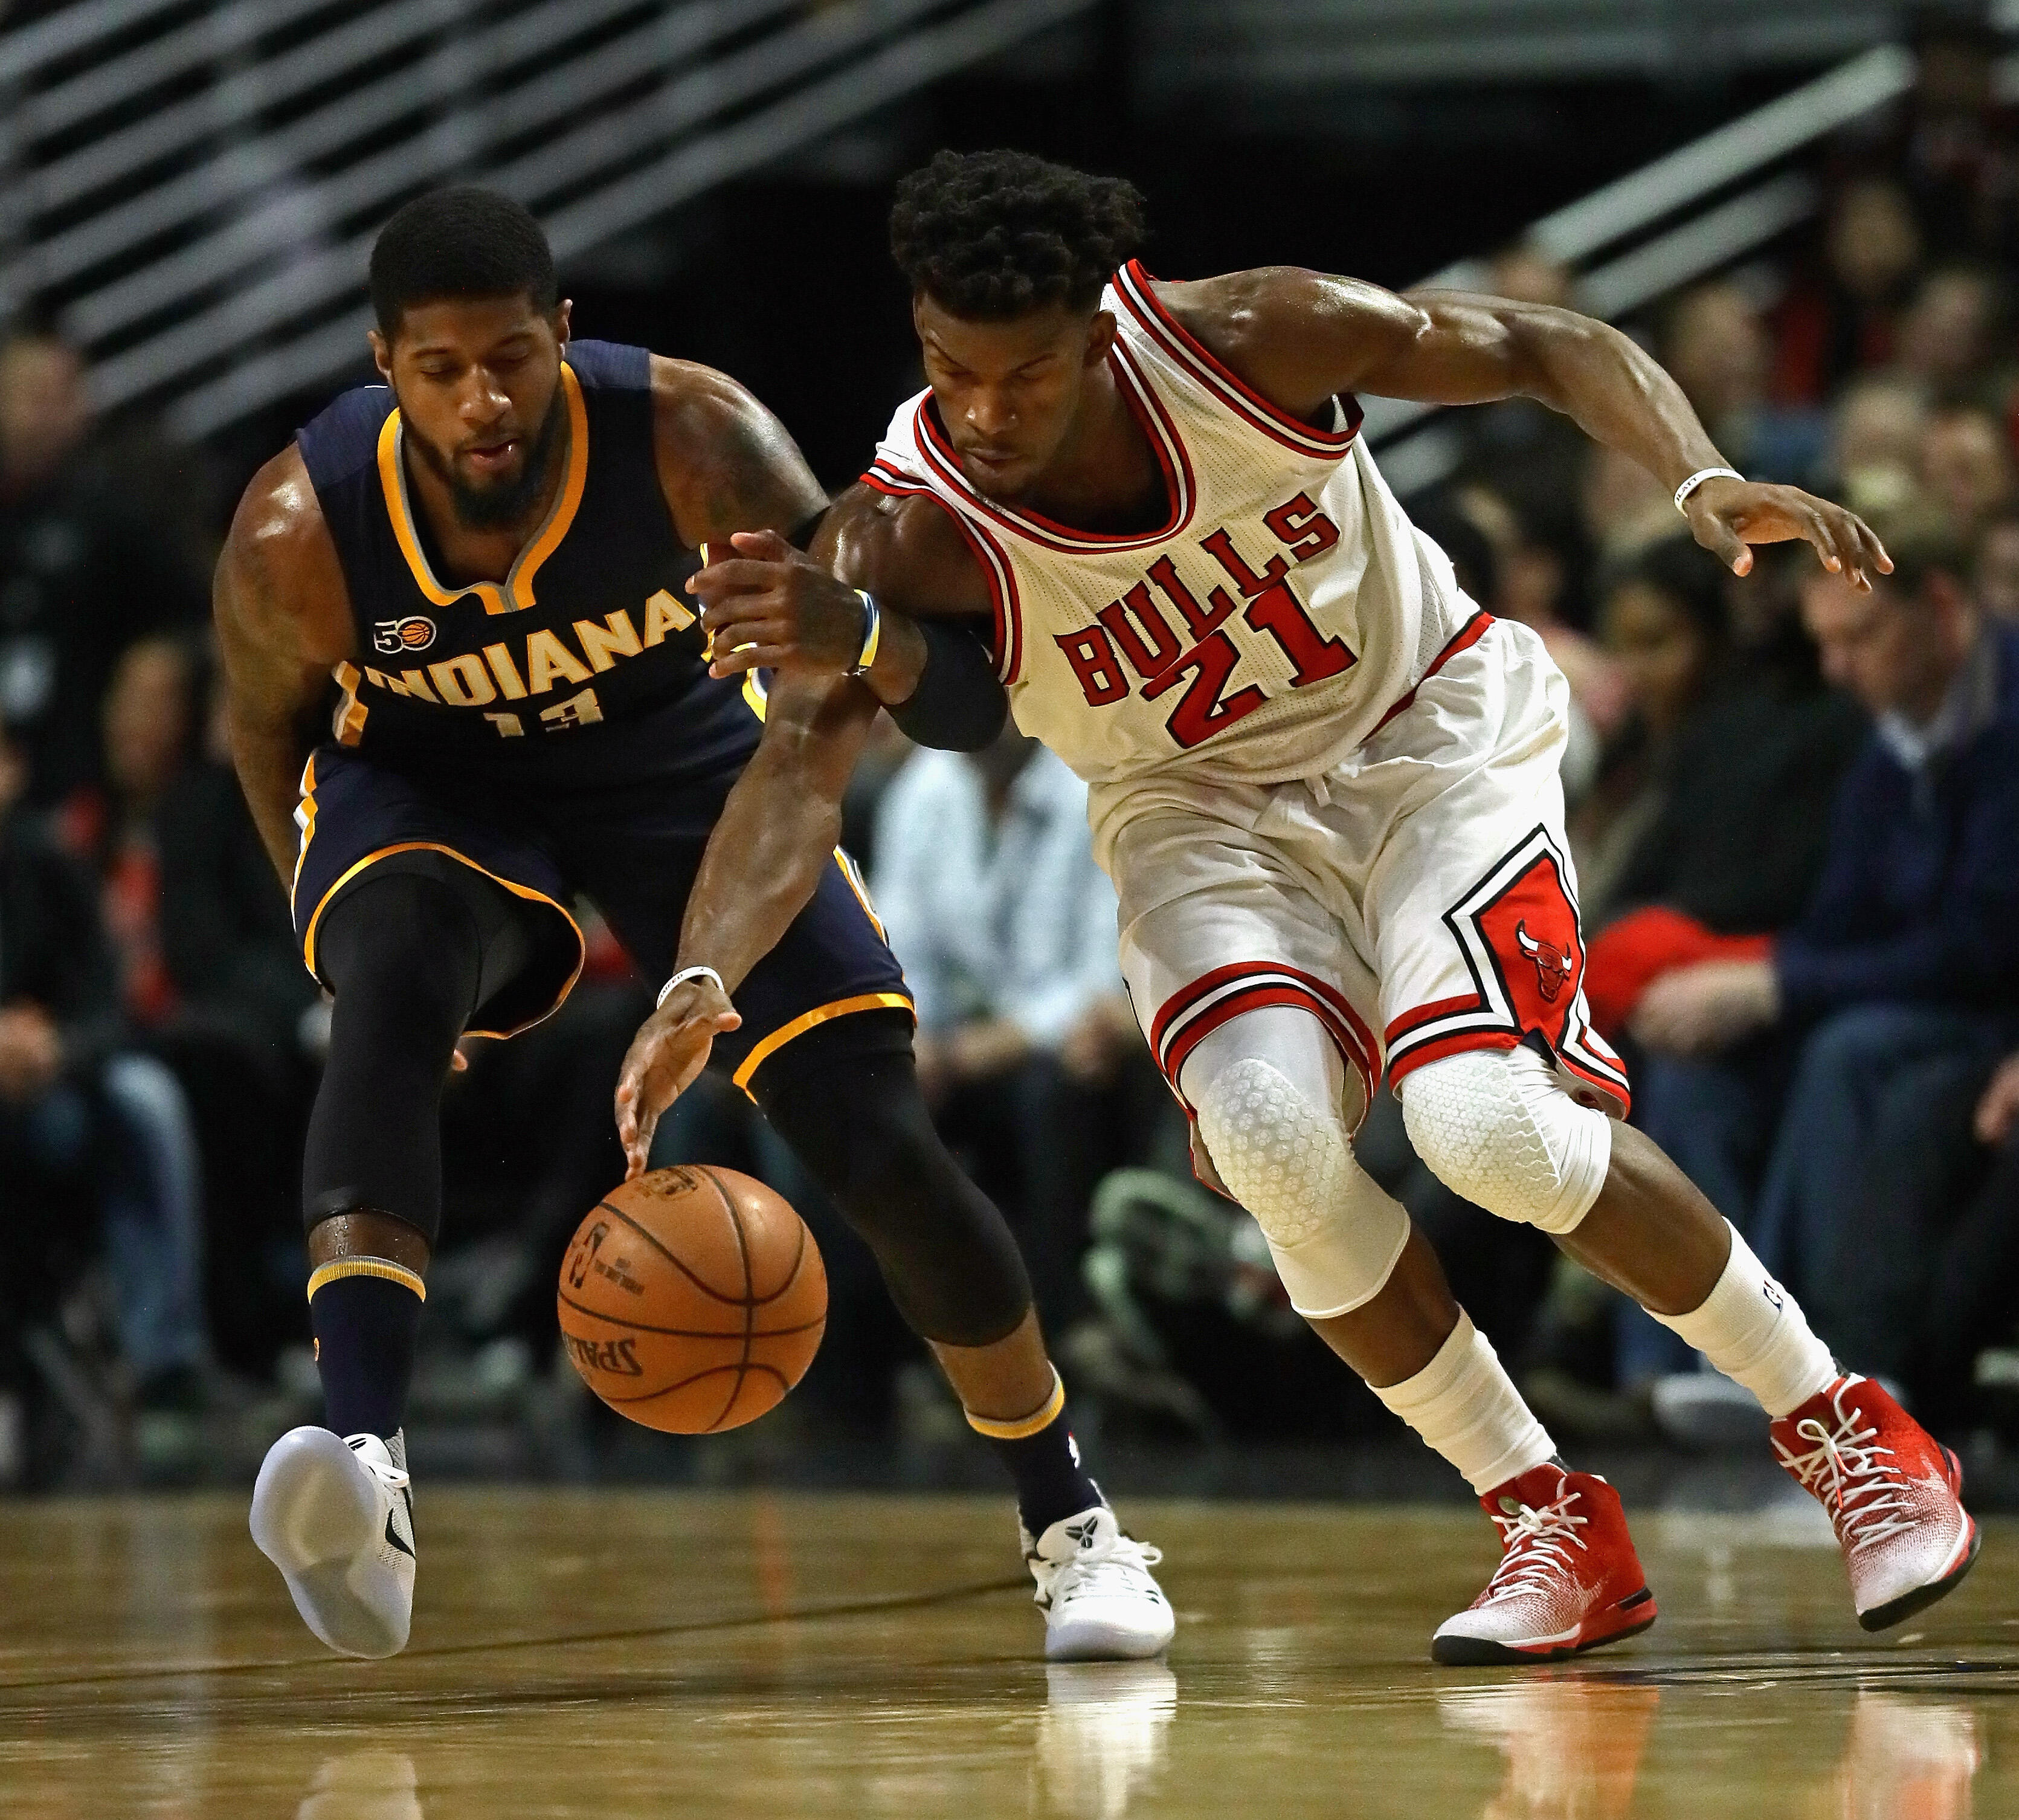 CHICAGO, IL - DECEMBER 26: Jimmy Butler #21 of the Chicago Bulls and Paul George #13 of the Indiana Pacers chase down a loose ball at the United Center on December 26, 2016 in Chicago, Illinois. (Photo by Jonathan Daniel/Getty Images)